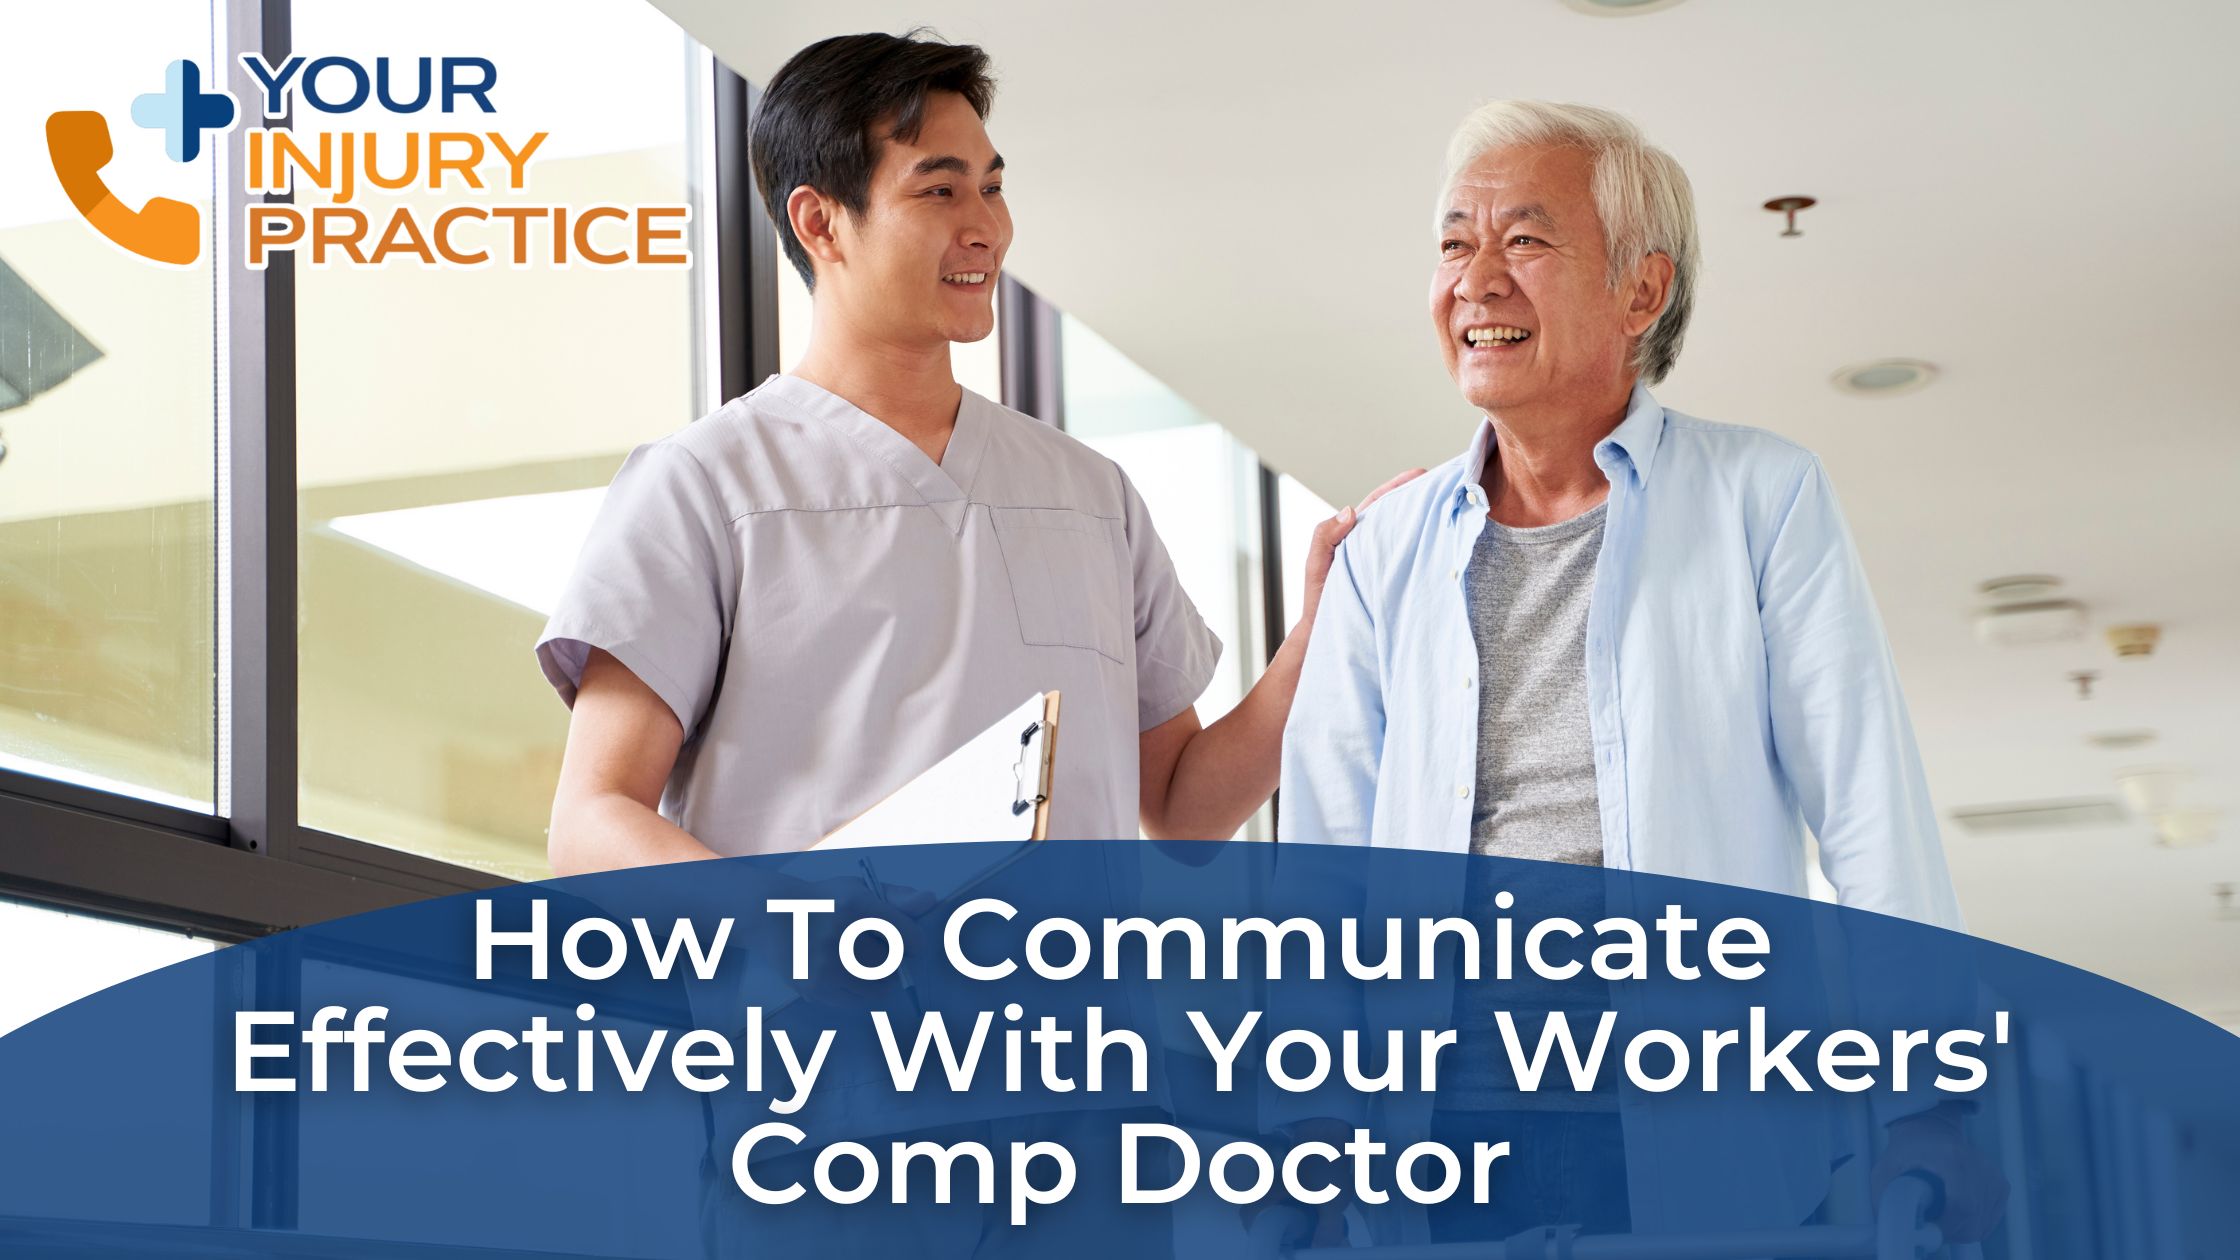 How to Communicate Effectively with Your Workers' Comp Doctor